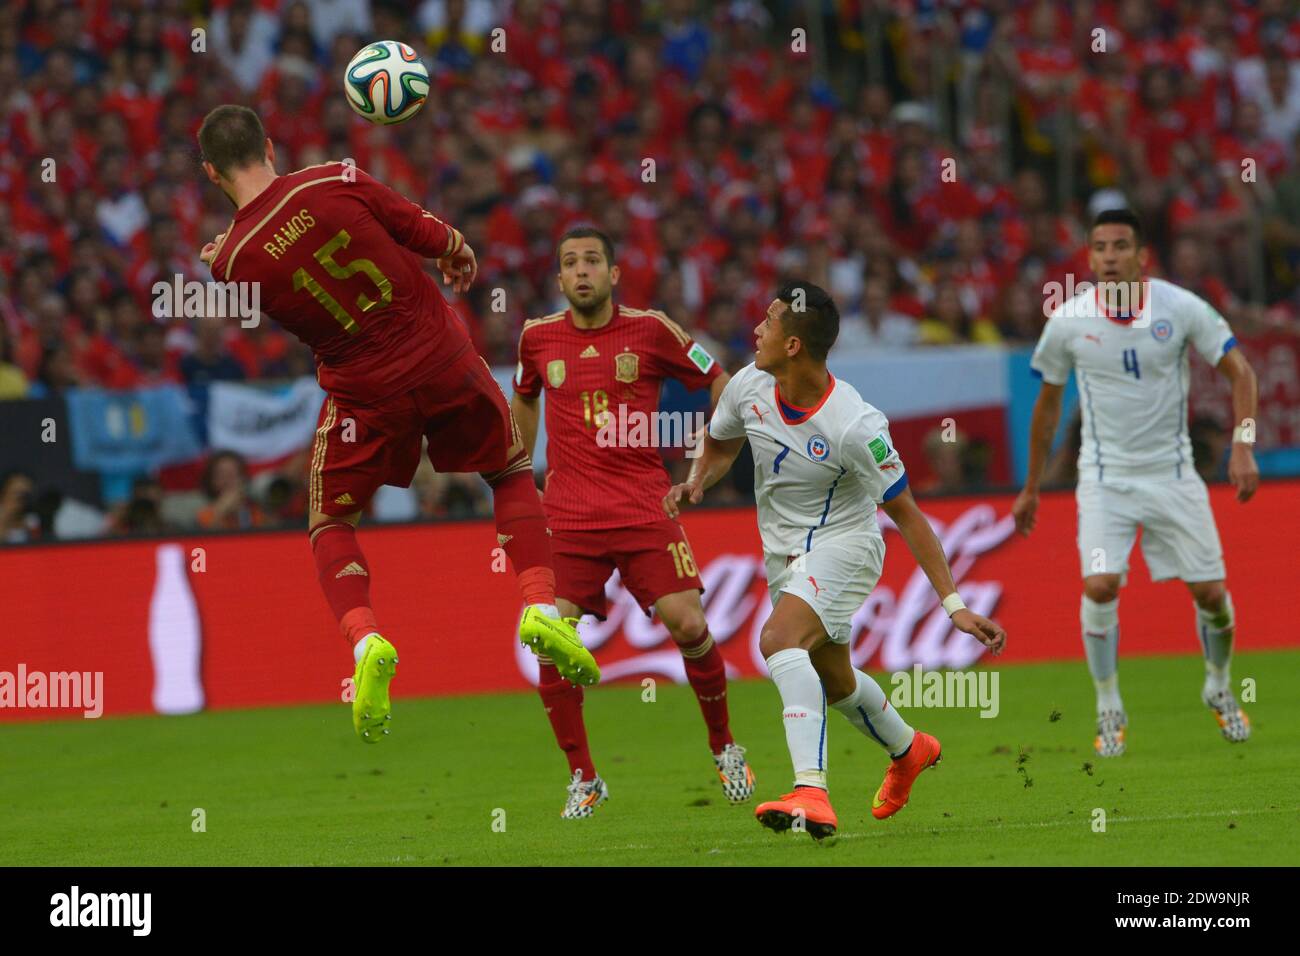 Spain's Sergio Ramos battling Chile's Alexis Sanchez during Soccer World Cup 2014 First round Group B match Spain v Chile at Maracana Stadium, Rio de Janeiro, Brazil , on June 18, 2014. Chile won 2-0 and ousted the defending champions from the competition. Photo by Henri Szwarc/ABACAPRESS.COM Stock Photo